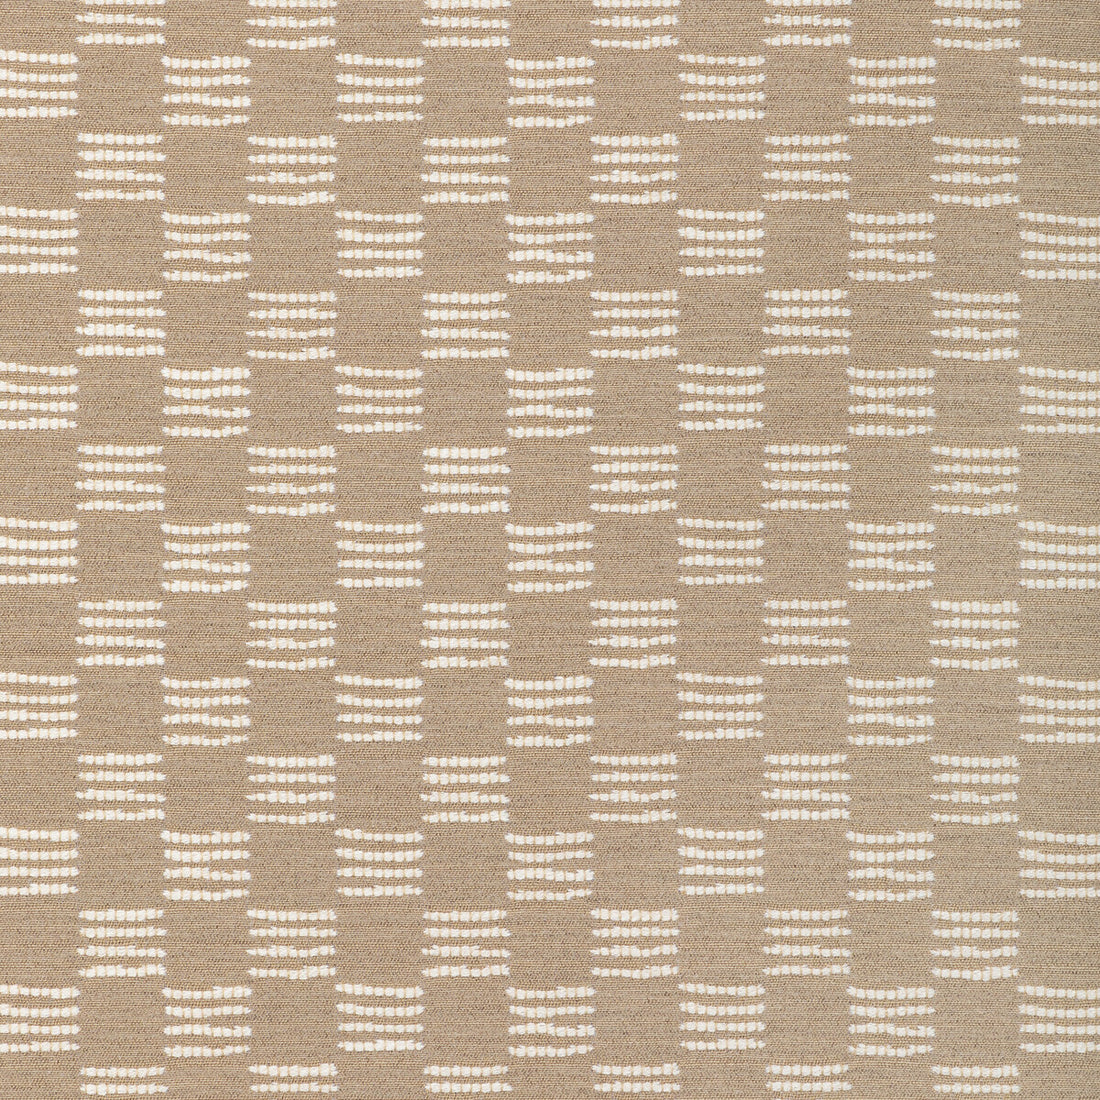 Stroll fabric in sand color - pattern GWF-3785.106.0 - by Lee Jofa Modern in the Kelly Wearstler Oculum Indoor/Outdoor collection